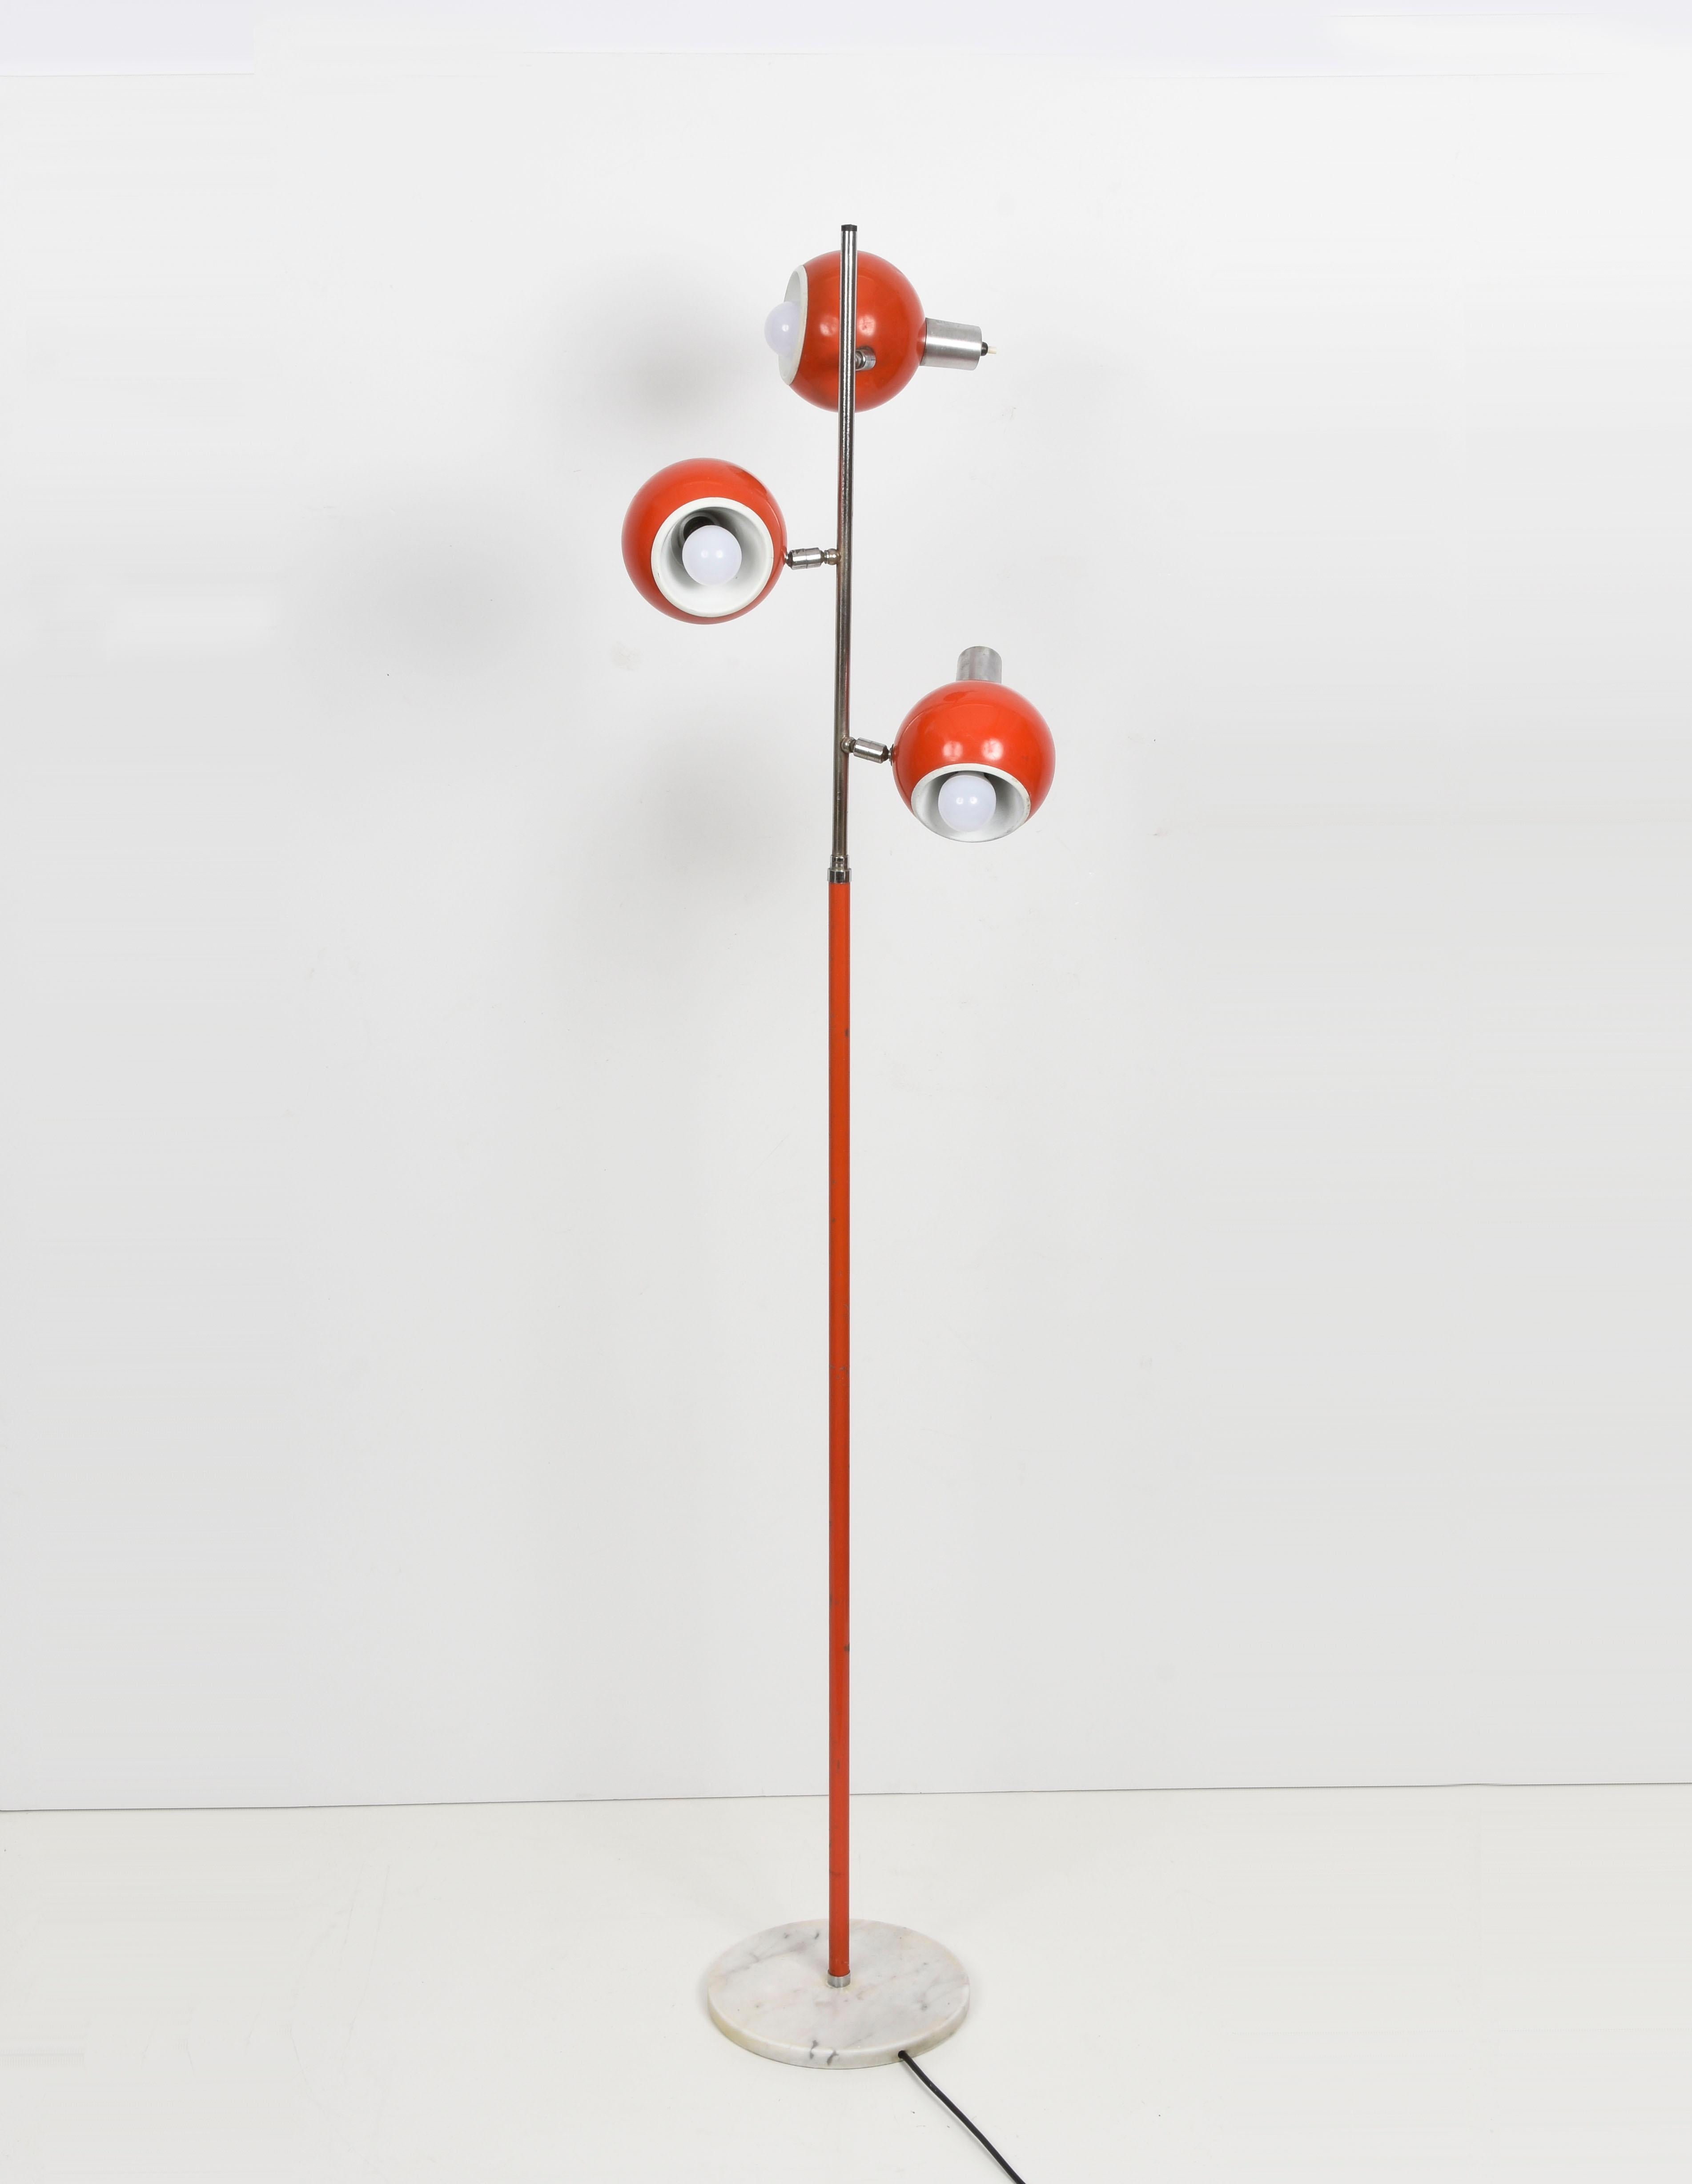 Amazing Space Age orange floor lamp with three adjustable lights and independent switching. This wonderful piece was designed in Italy during the 1970s and produced by Luci Italia manufacture.
 
This item has a base in Carrara white marble, three